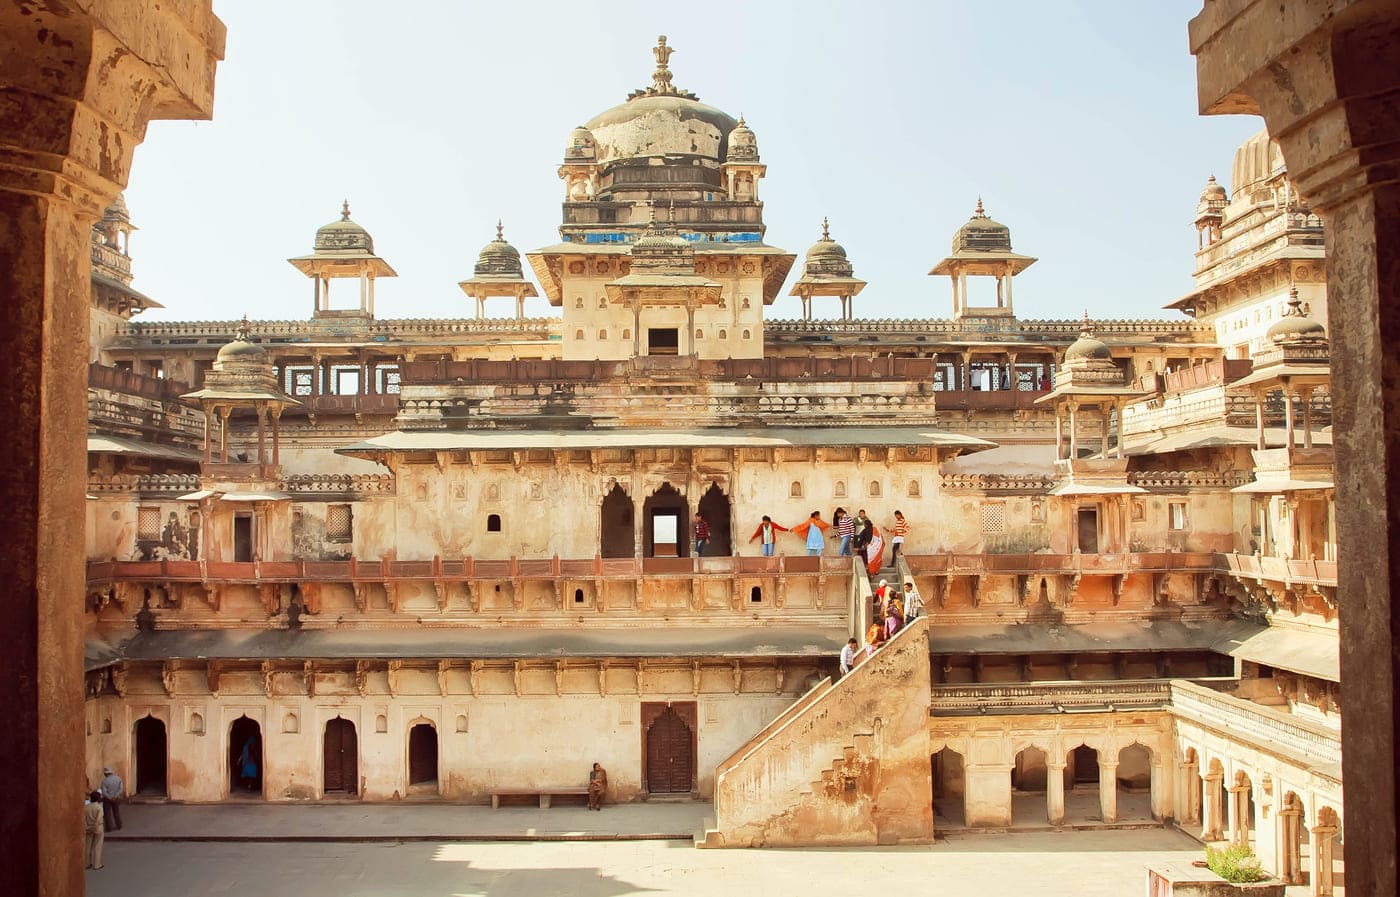 A group of visitors climb up the stairs at ancient fort Jahangir to explore the environs and interiors of the seventeenth century mammoth structure, Orchha 